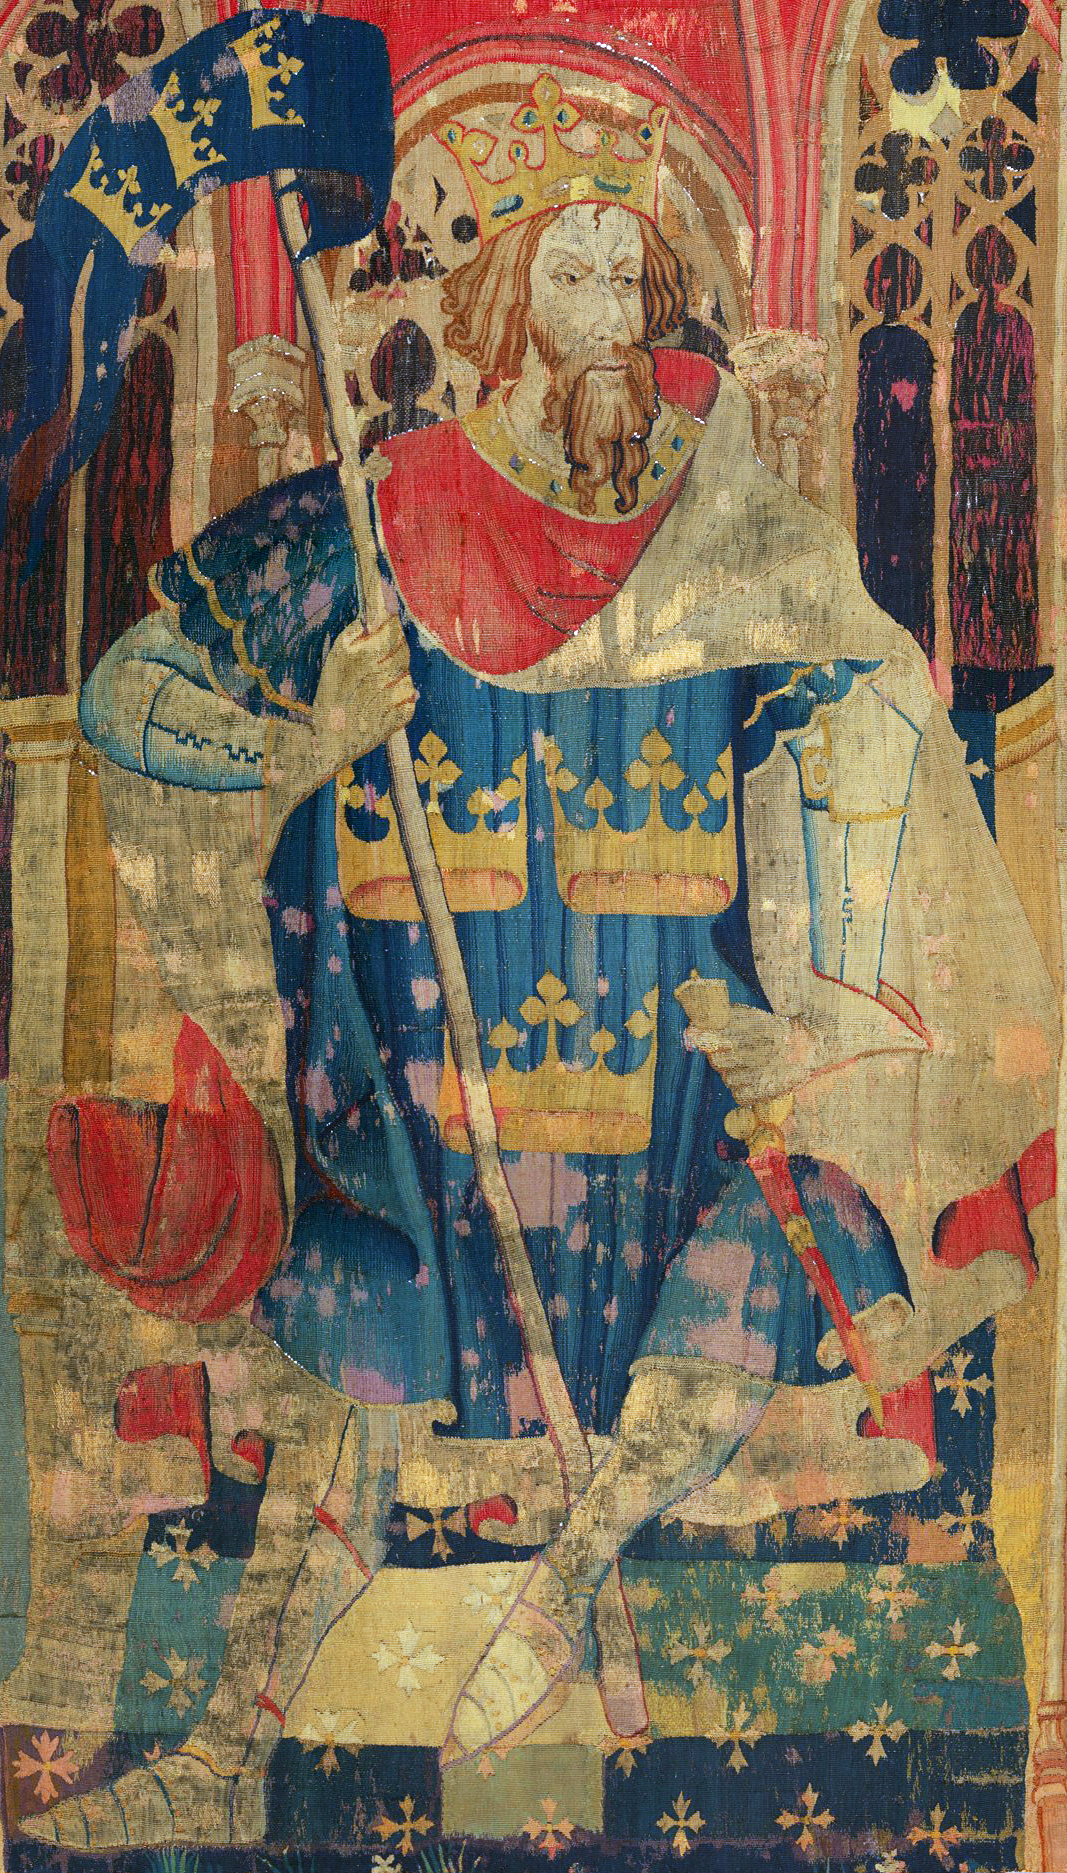 Tapestry depicting King Arthur sitting on a throne, holding a banner.